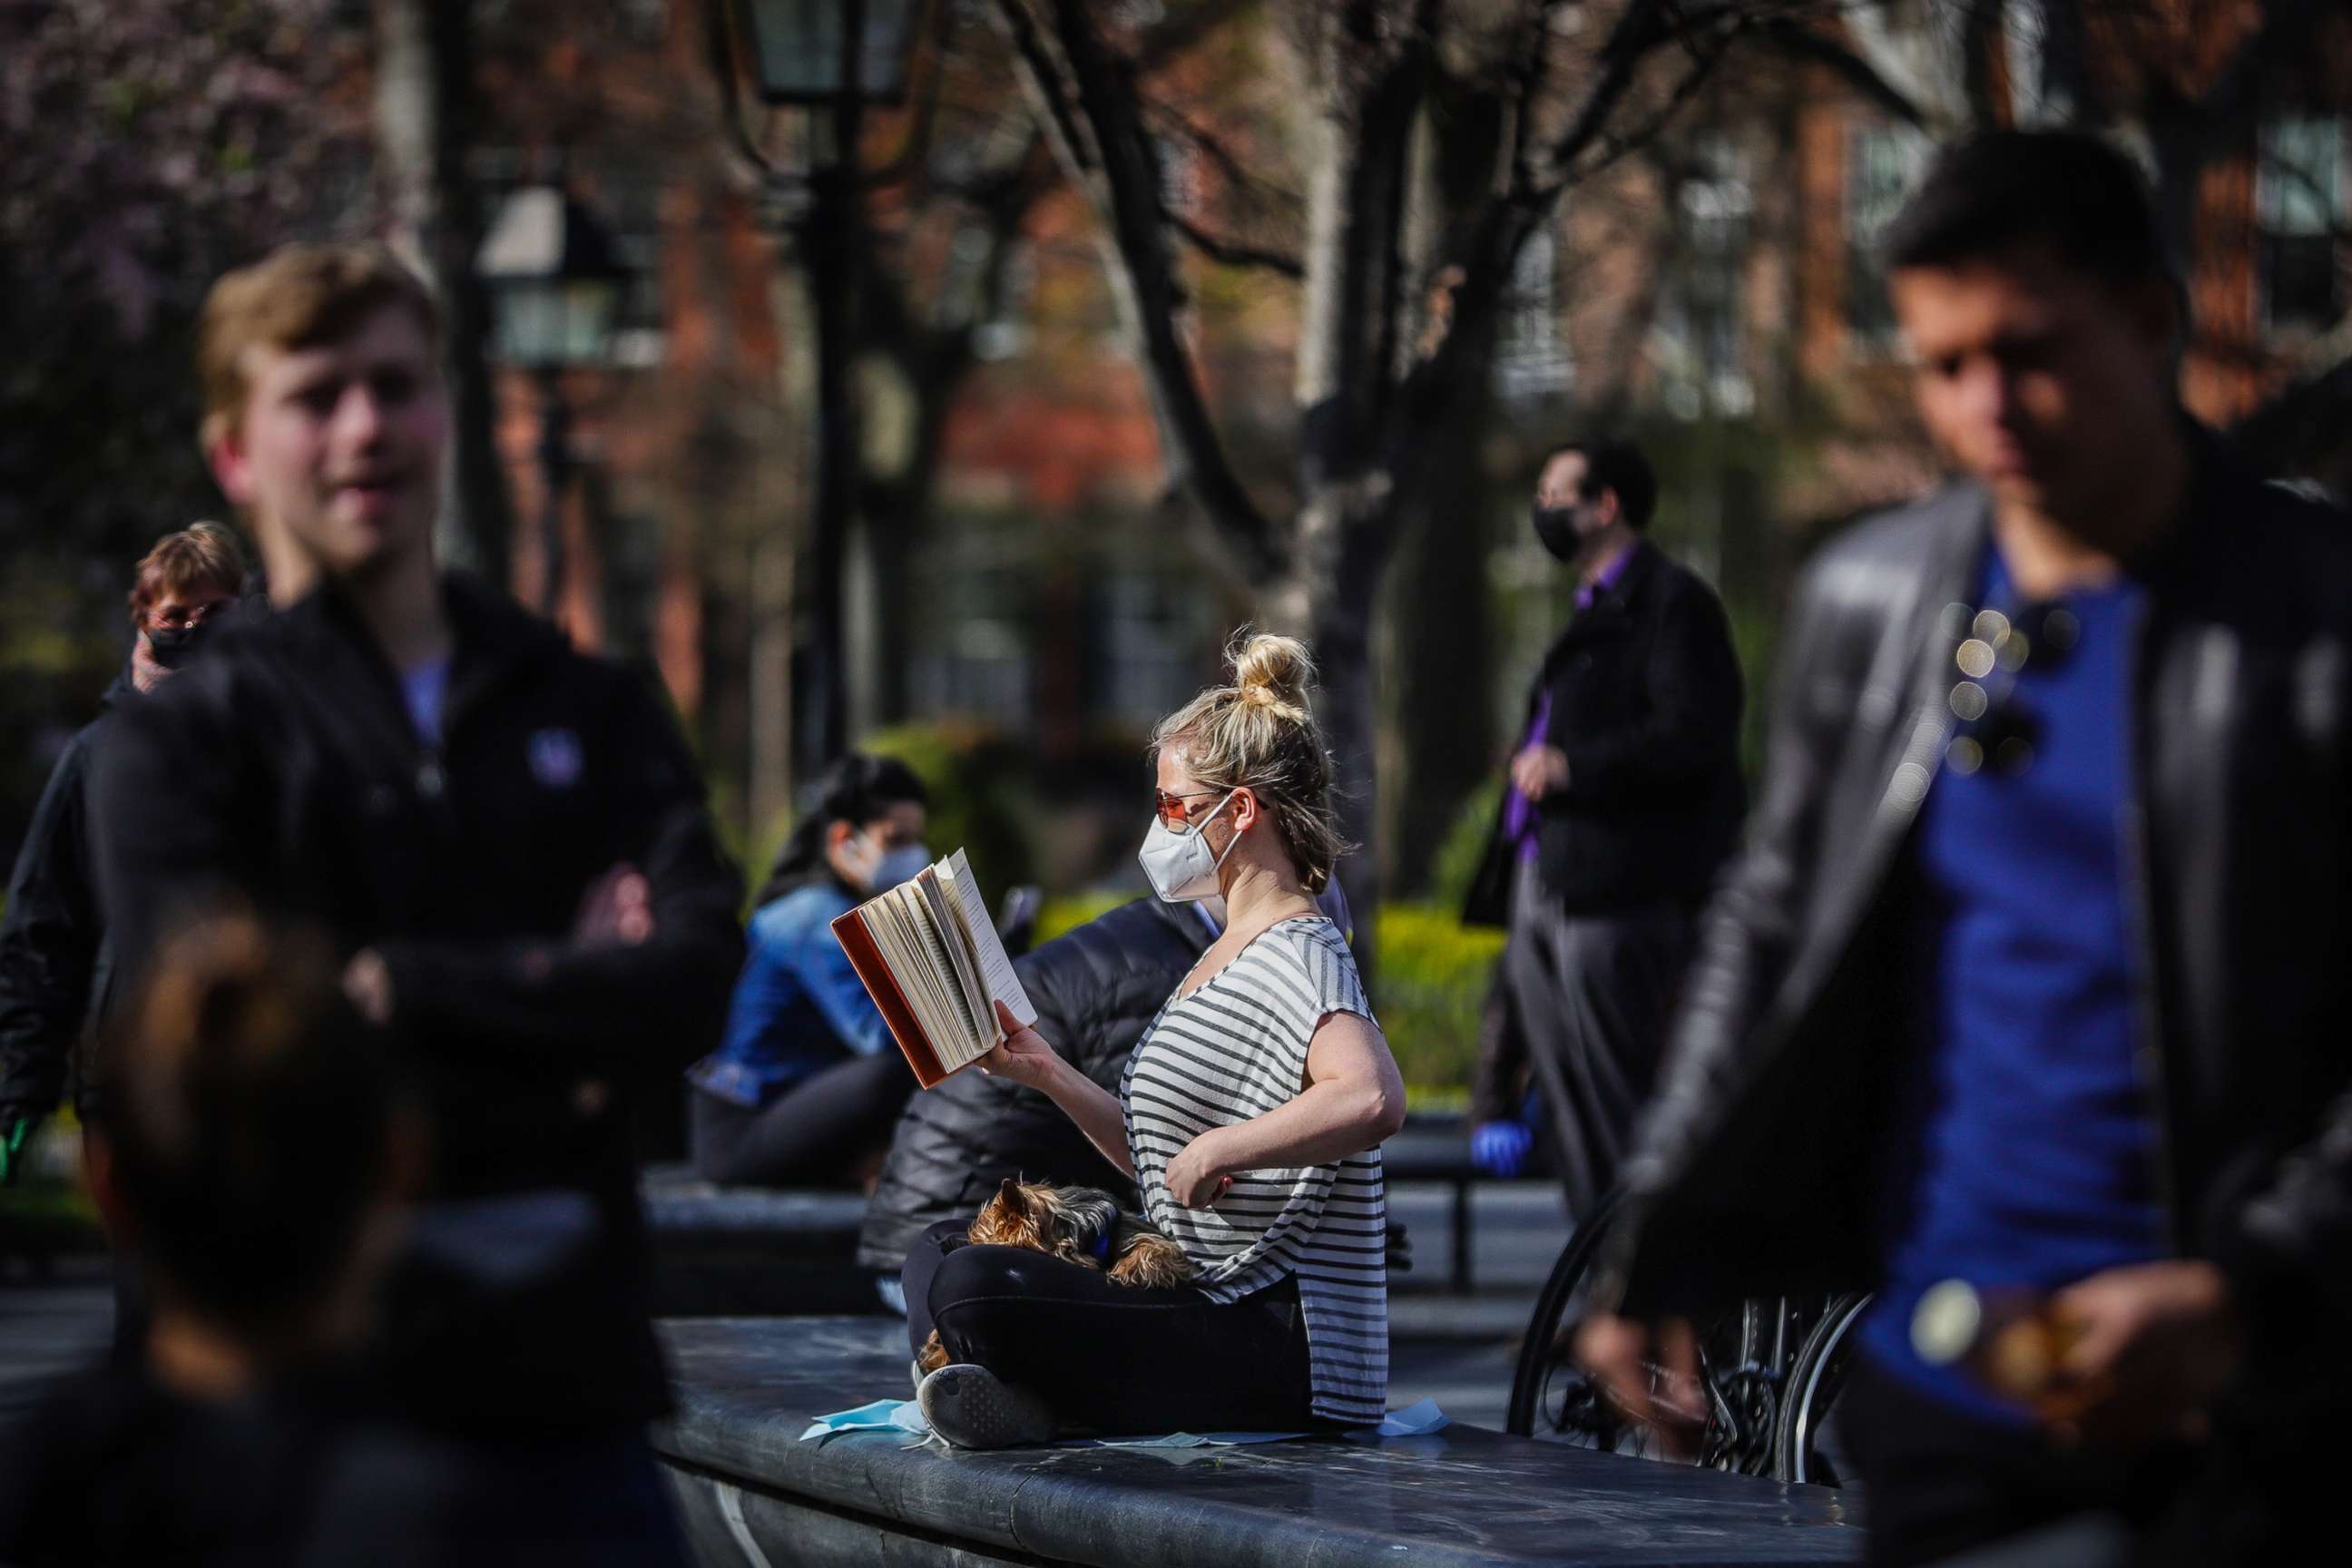 PHOTO: People enjoy the outdoors in New York's Washington Square Park, April 11, 2020.